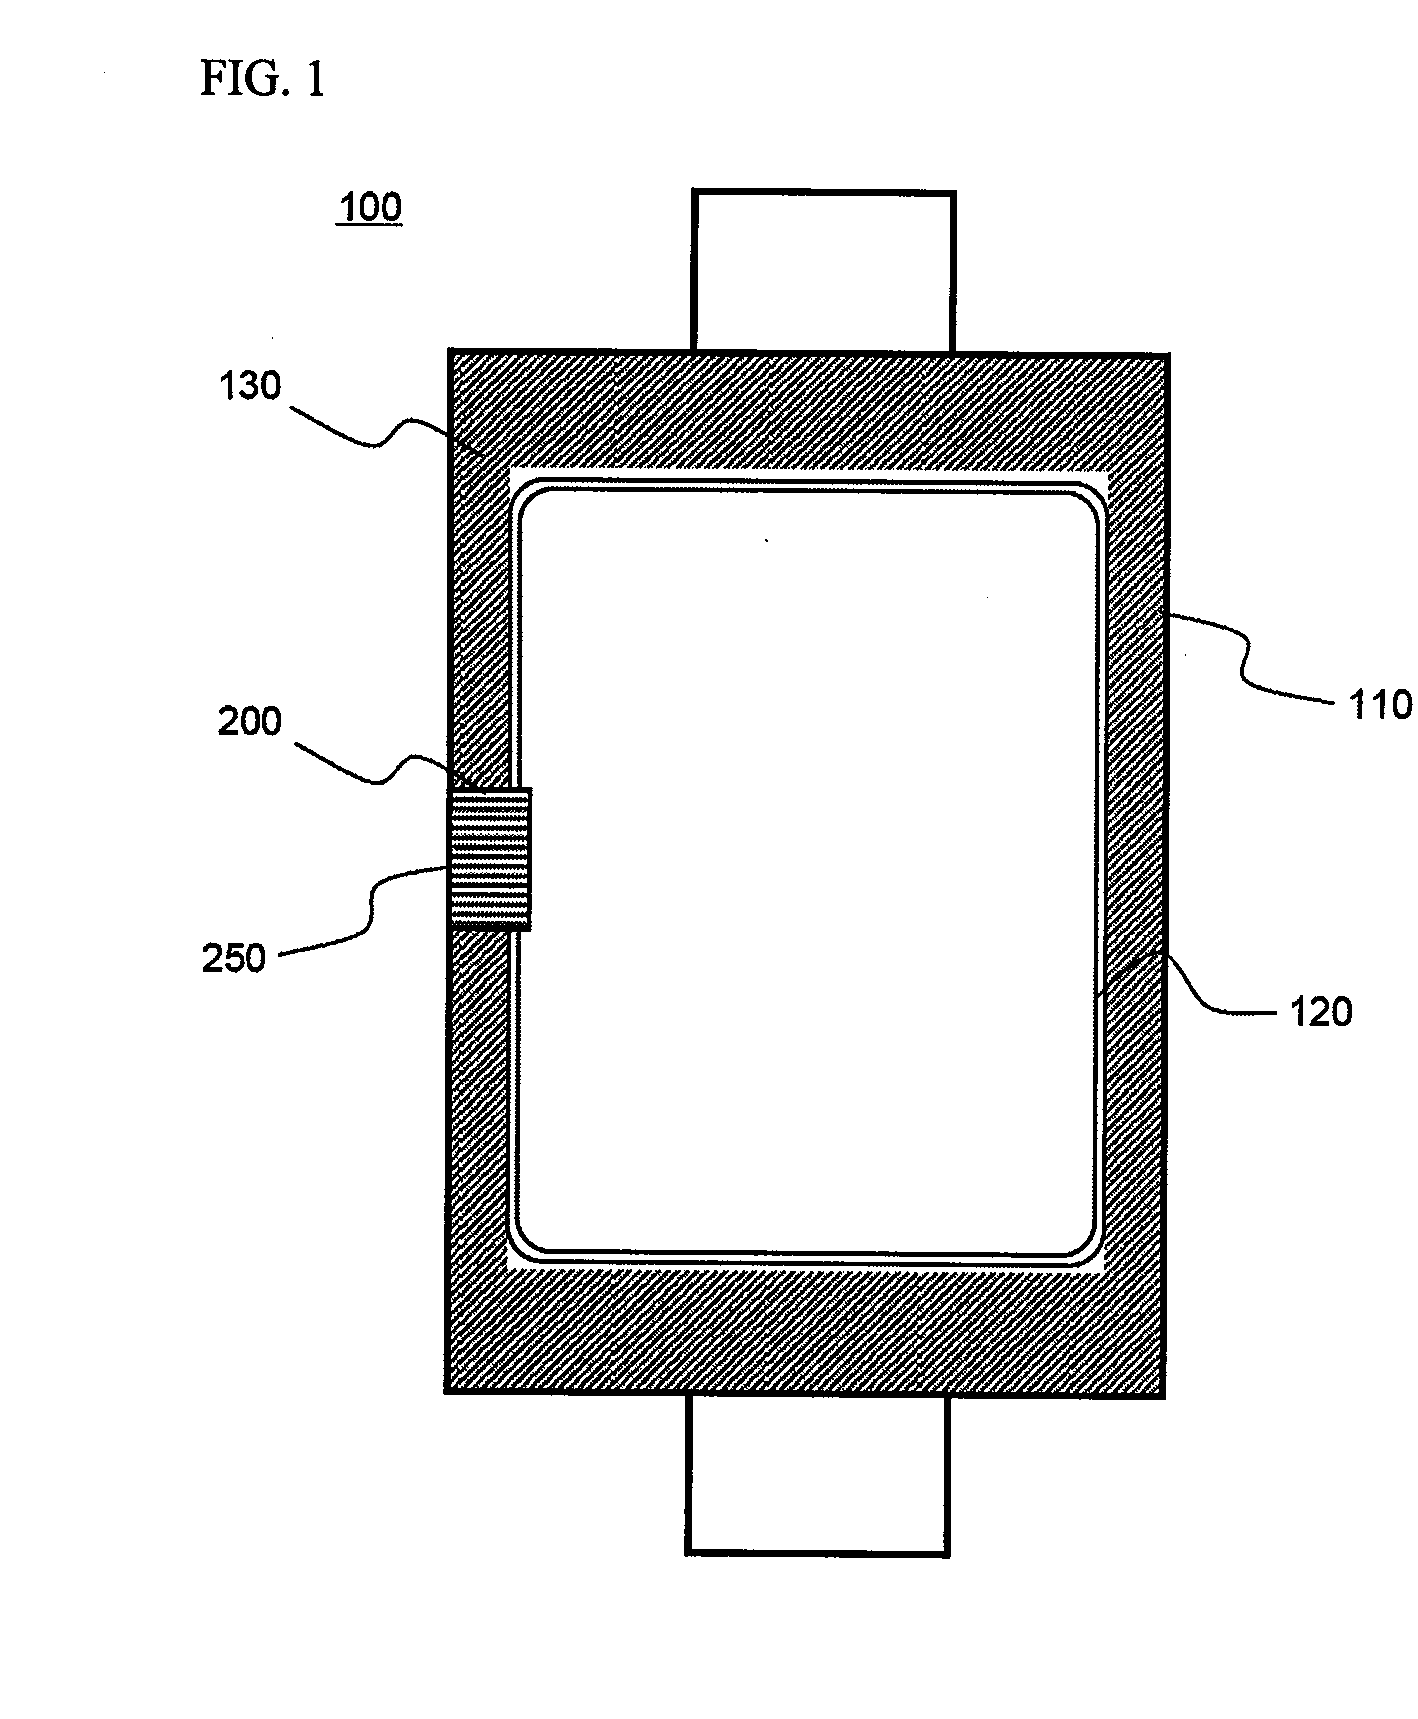 Secondary battery including one-way exhaust valve